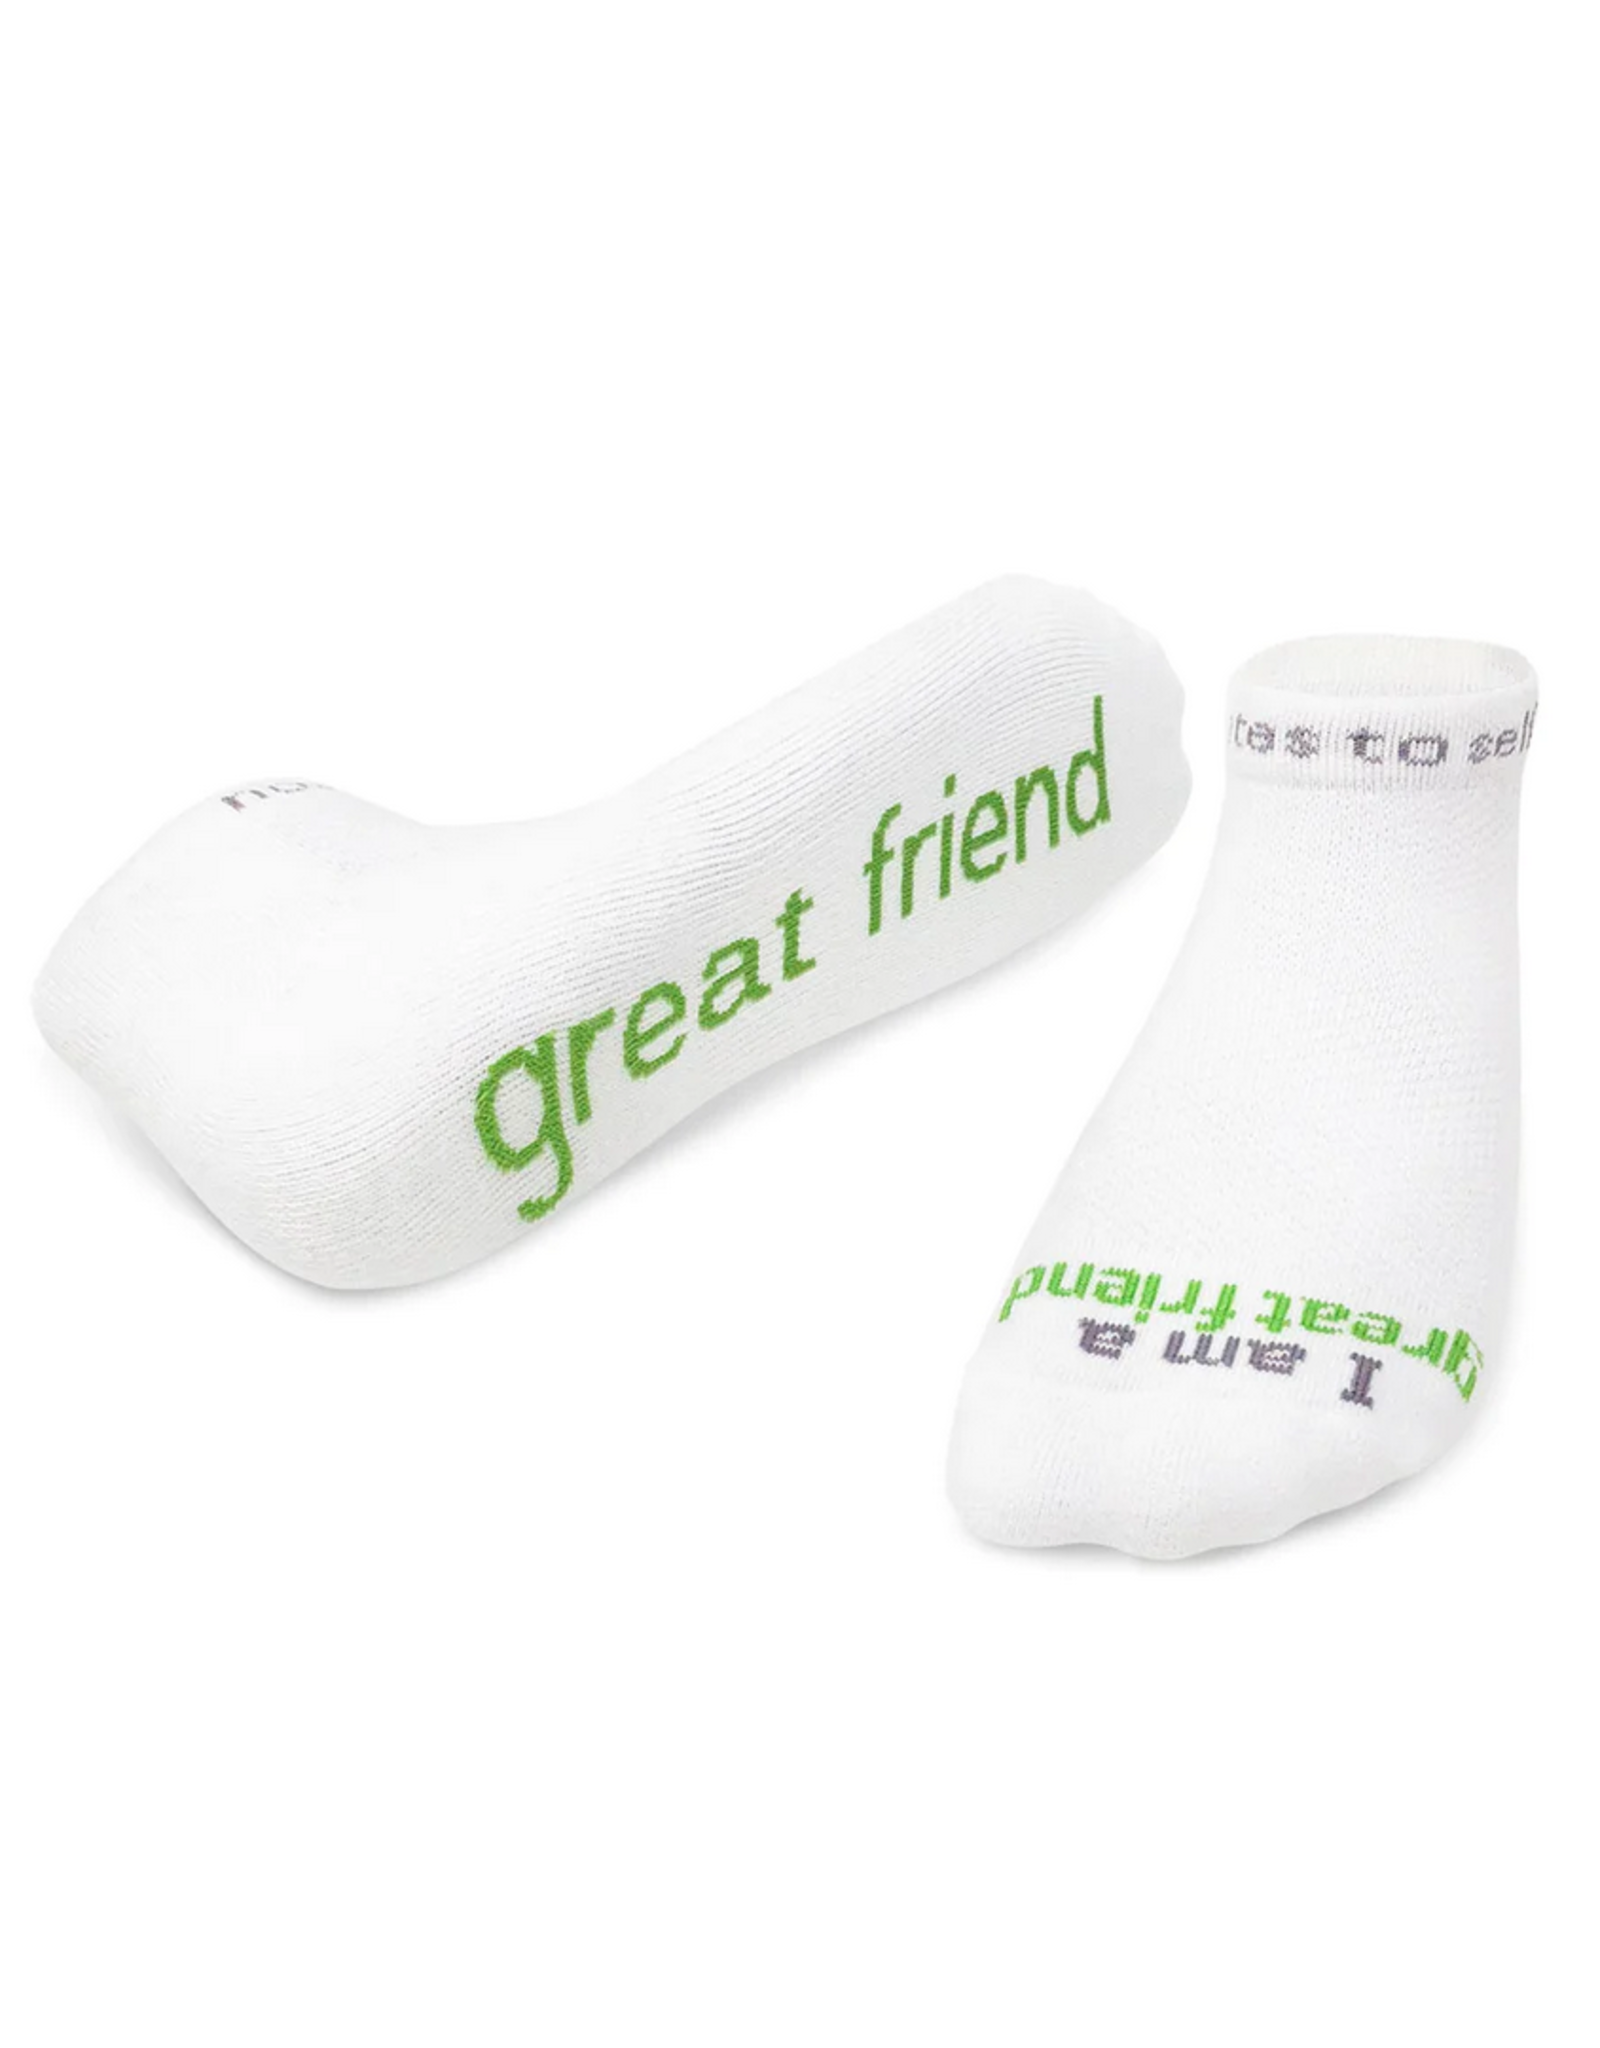 notes to self Notes to Self GREAT FRIEND 'I am a great friend' Low-Cut Socks